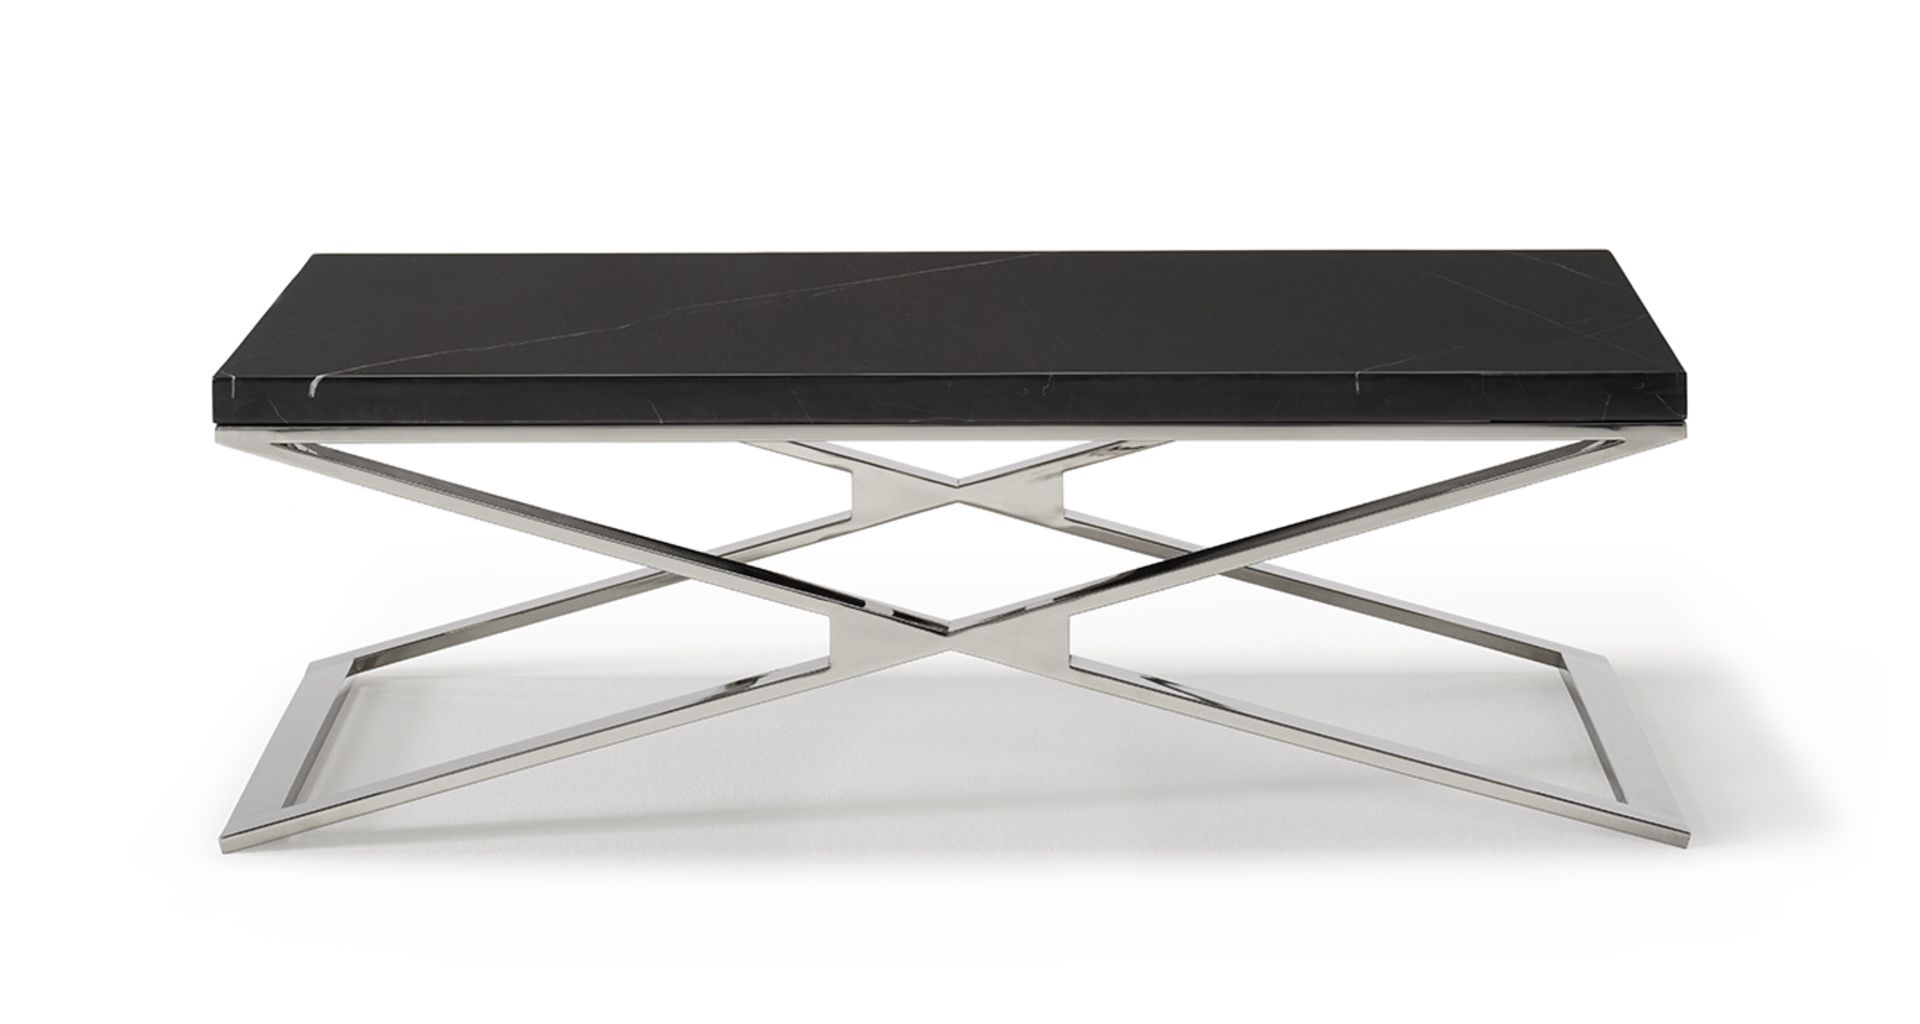 Zephyr Coffee Table by Kesterport This coffee Table has a classic frame design which we have updated - Image 7 of 7